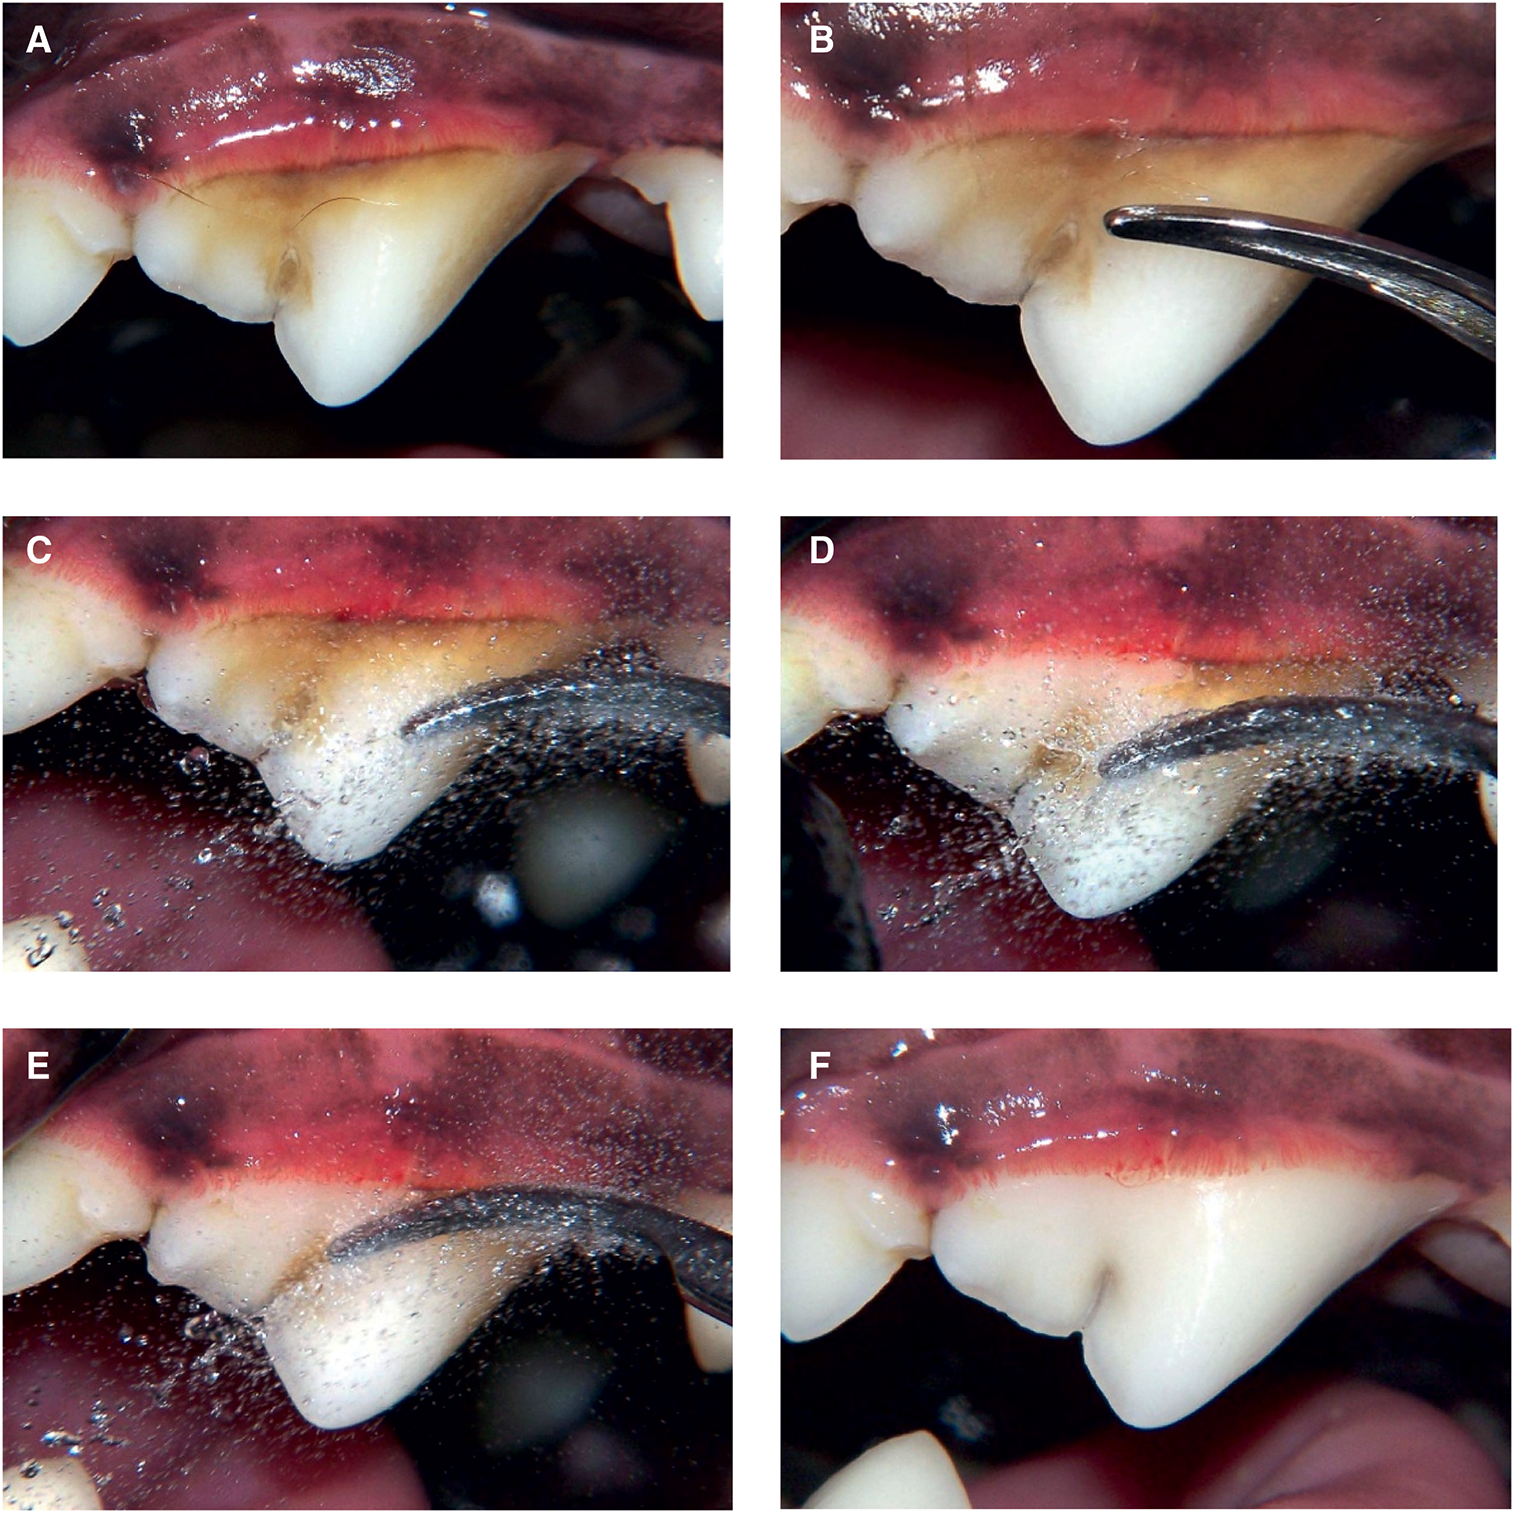 Sequence of dental cleaning